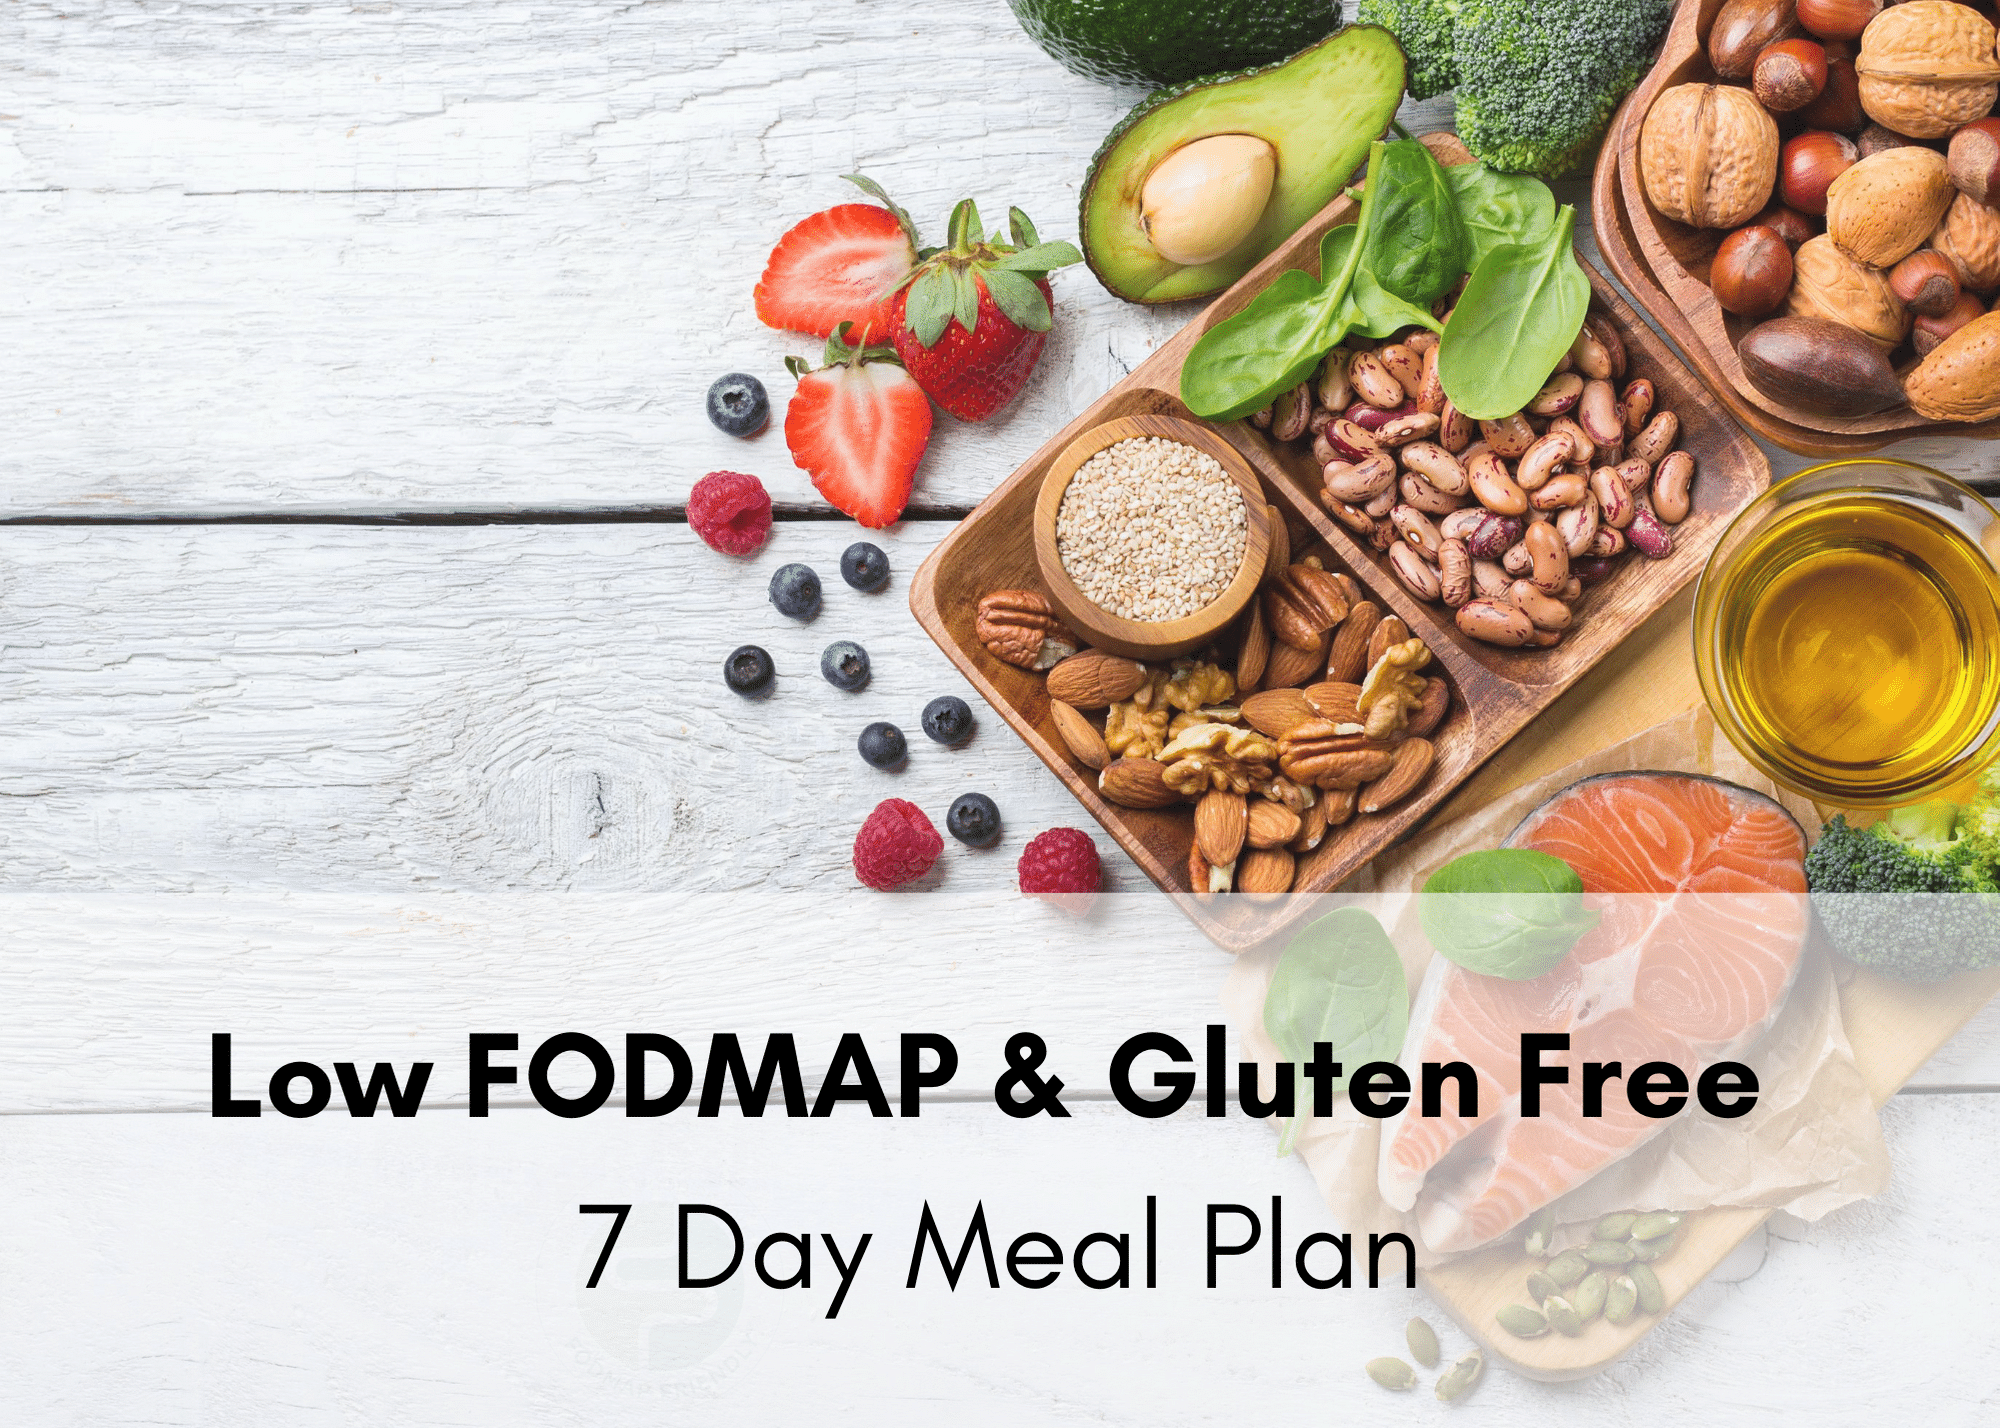 New To The Low Fodmap Diet Your Guide To A Low Fodmap Gluten Free 7 Day Meal Plan Fodmap Friendly